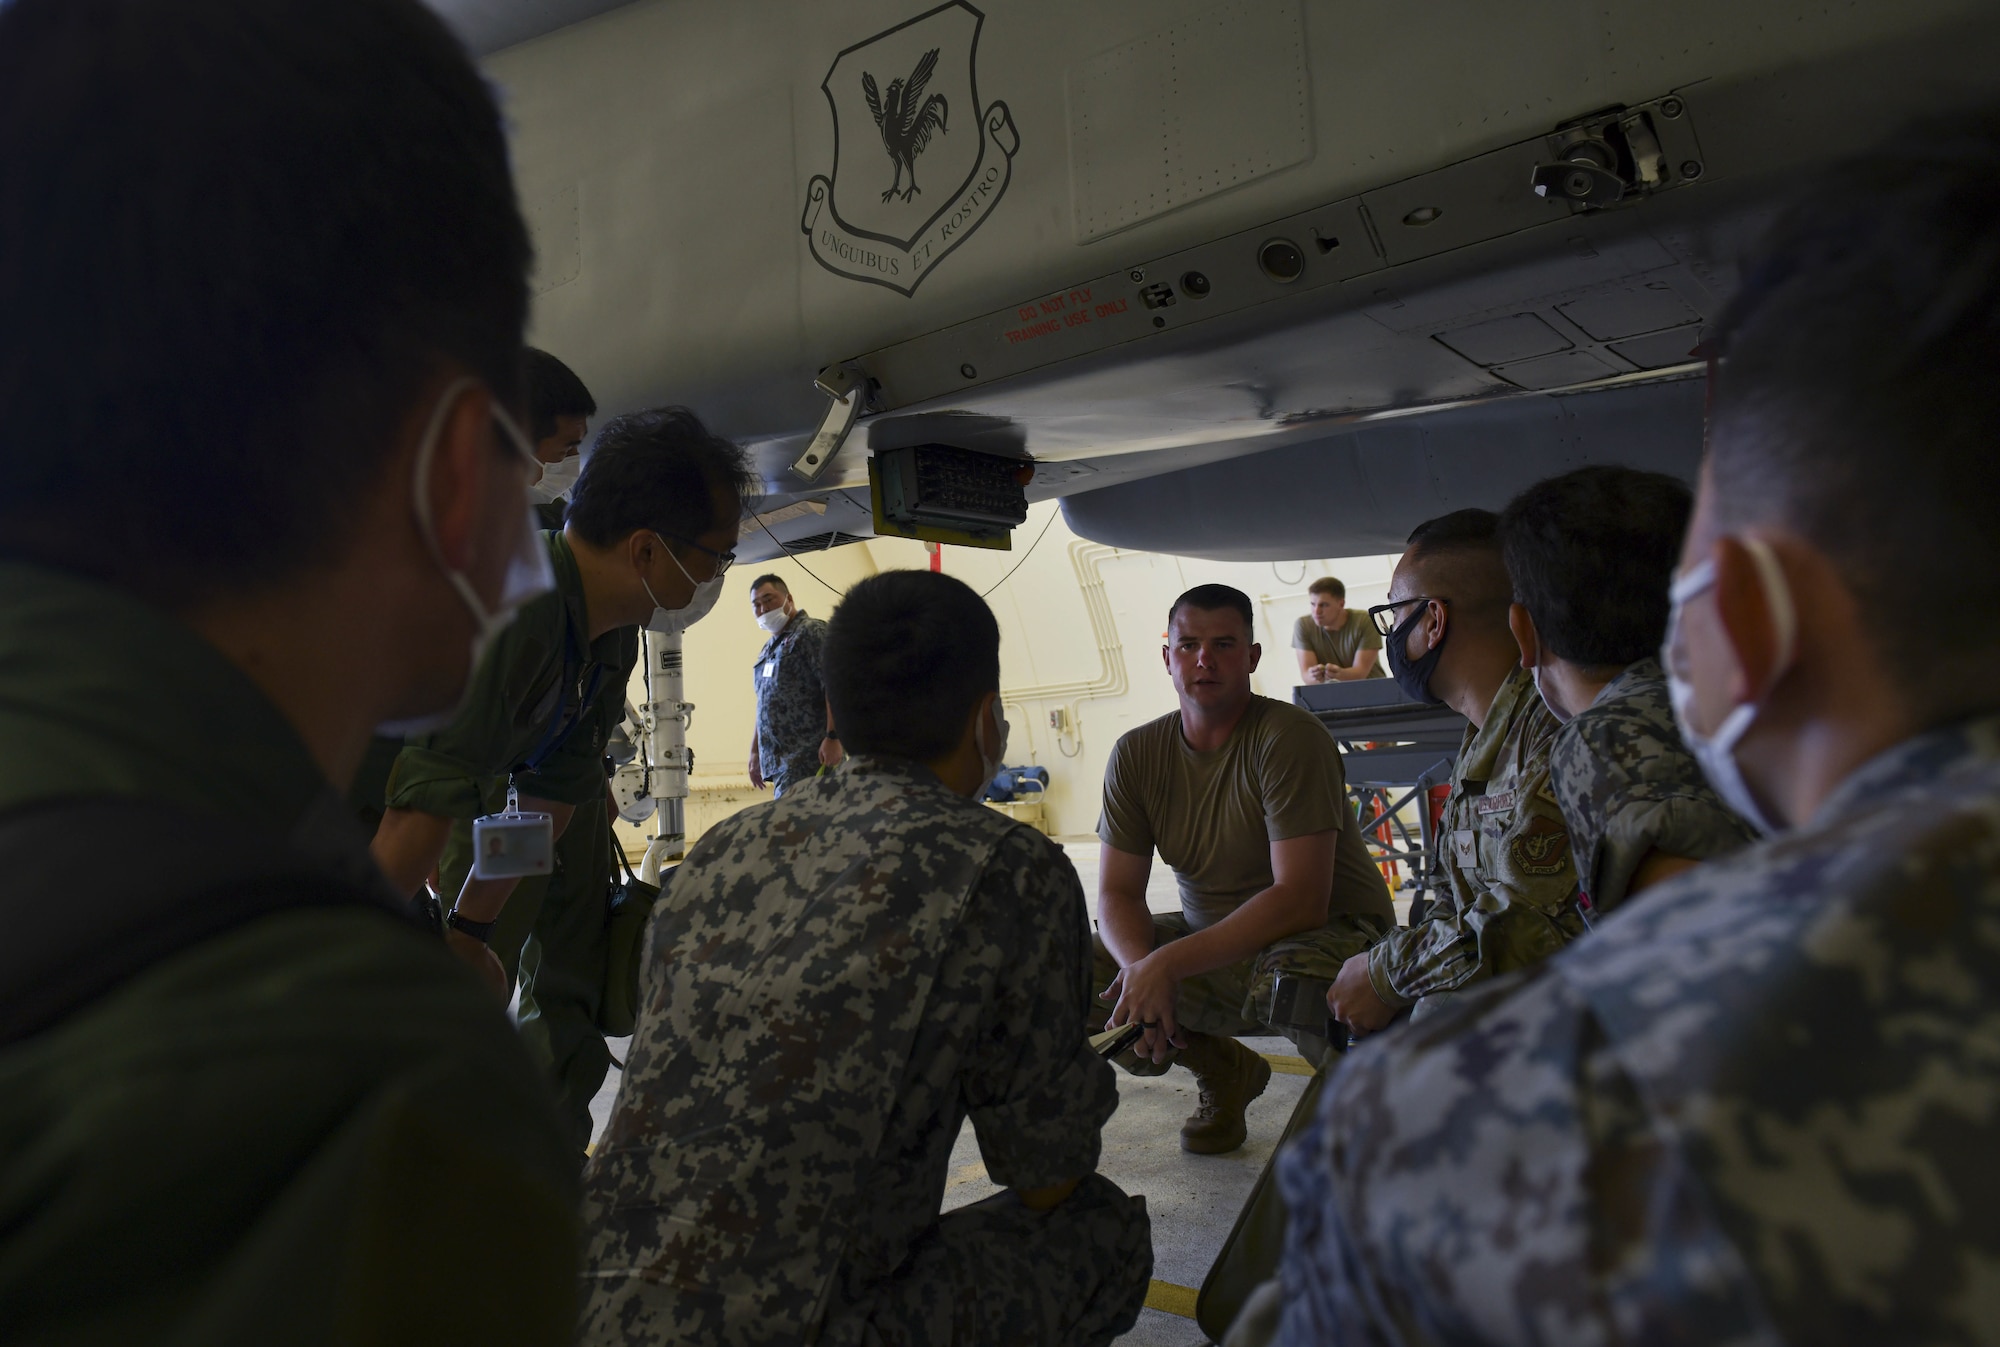 U.S. Air Force Staff Sgt. Zachary Nelson, center, 18th Aircraft Maintenance Squadron F-15 Eagle crew chief instructor, briefs Japan Self-Defense Forces members on hot pit refueling duty responsibilities during a Bilateral Defense of Okinawa Working Group at Kadena Air Base, Japan, Aug. 2, 2022. The BDOWG is an annual event where Japanese and US Forces assigned to Okinawa come together to discuss ways to further bilateral training, operational integration and overall defense, safety, and partnership in the region. (U.S. Air Force photo by Staff Sgt. Savannah L. Waters)